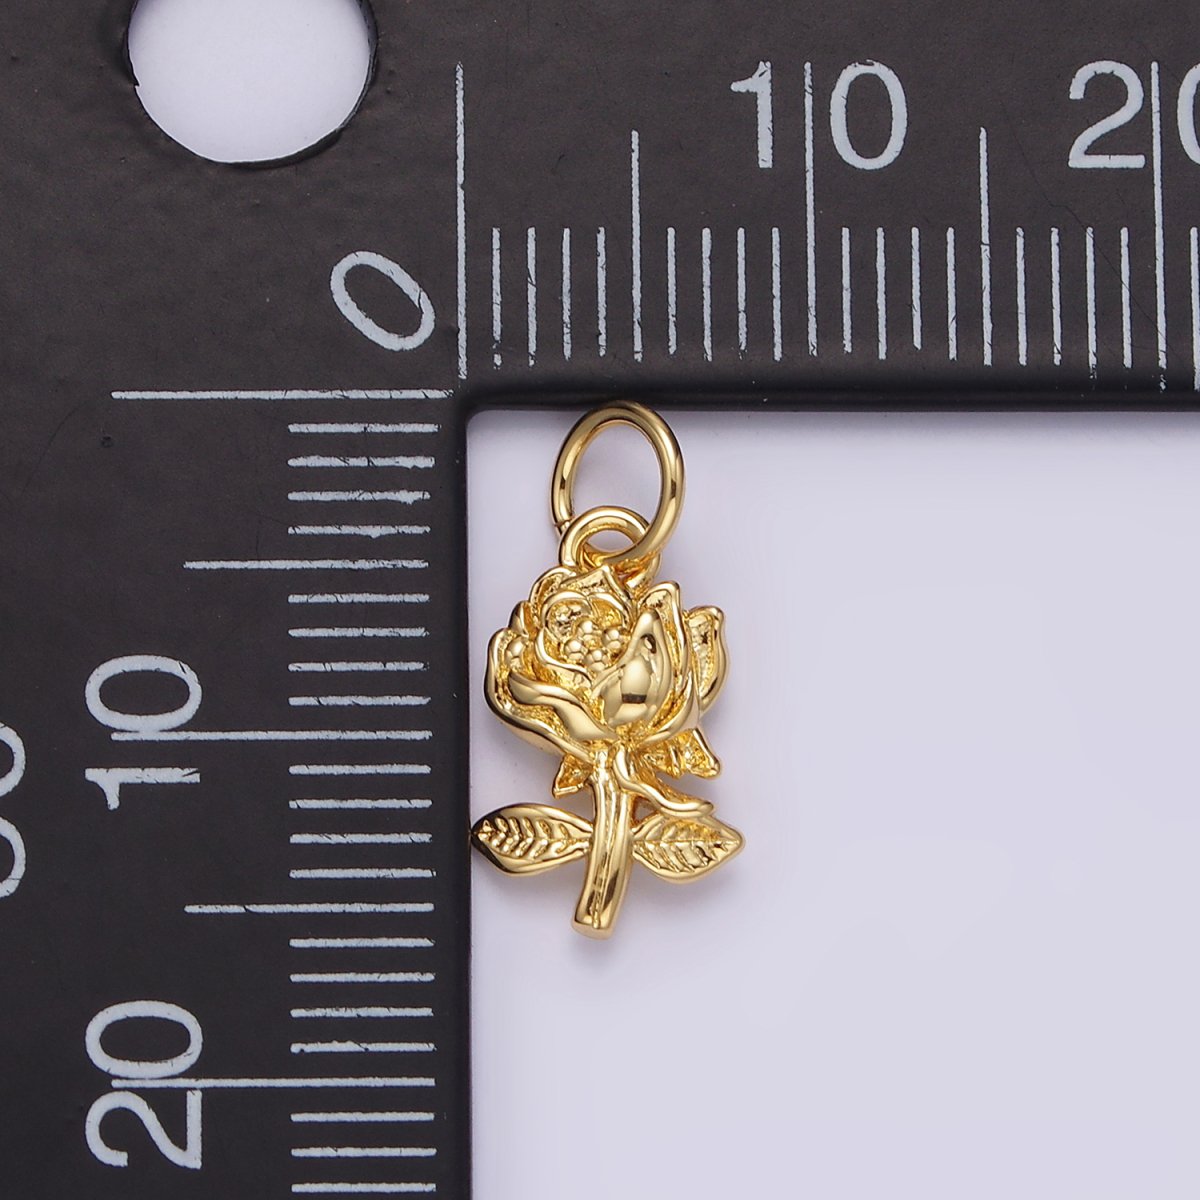 14K Gold Filled 16mm Rose Flower Nature Charm in Gold & Silver | N1112 N1113 - DLUXCA